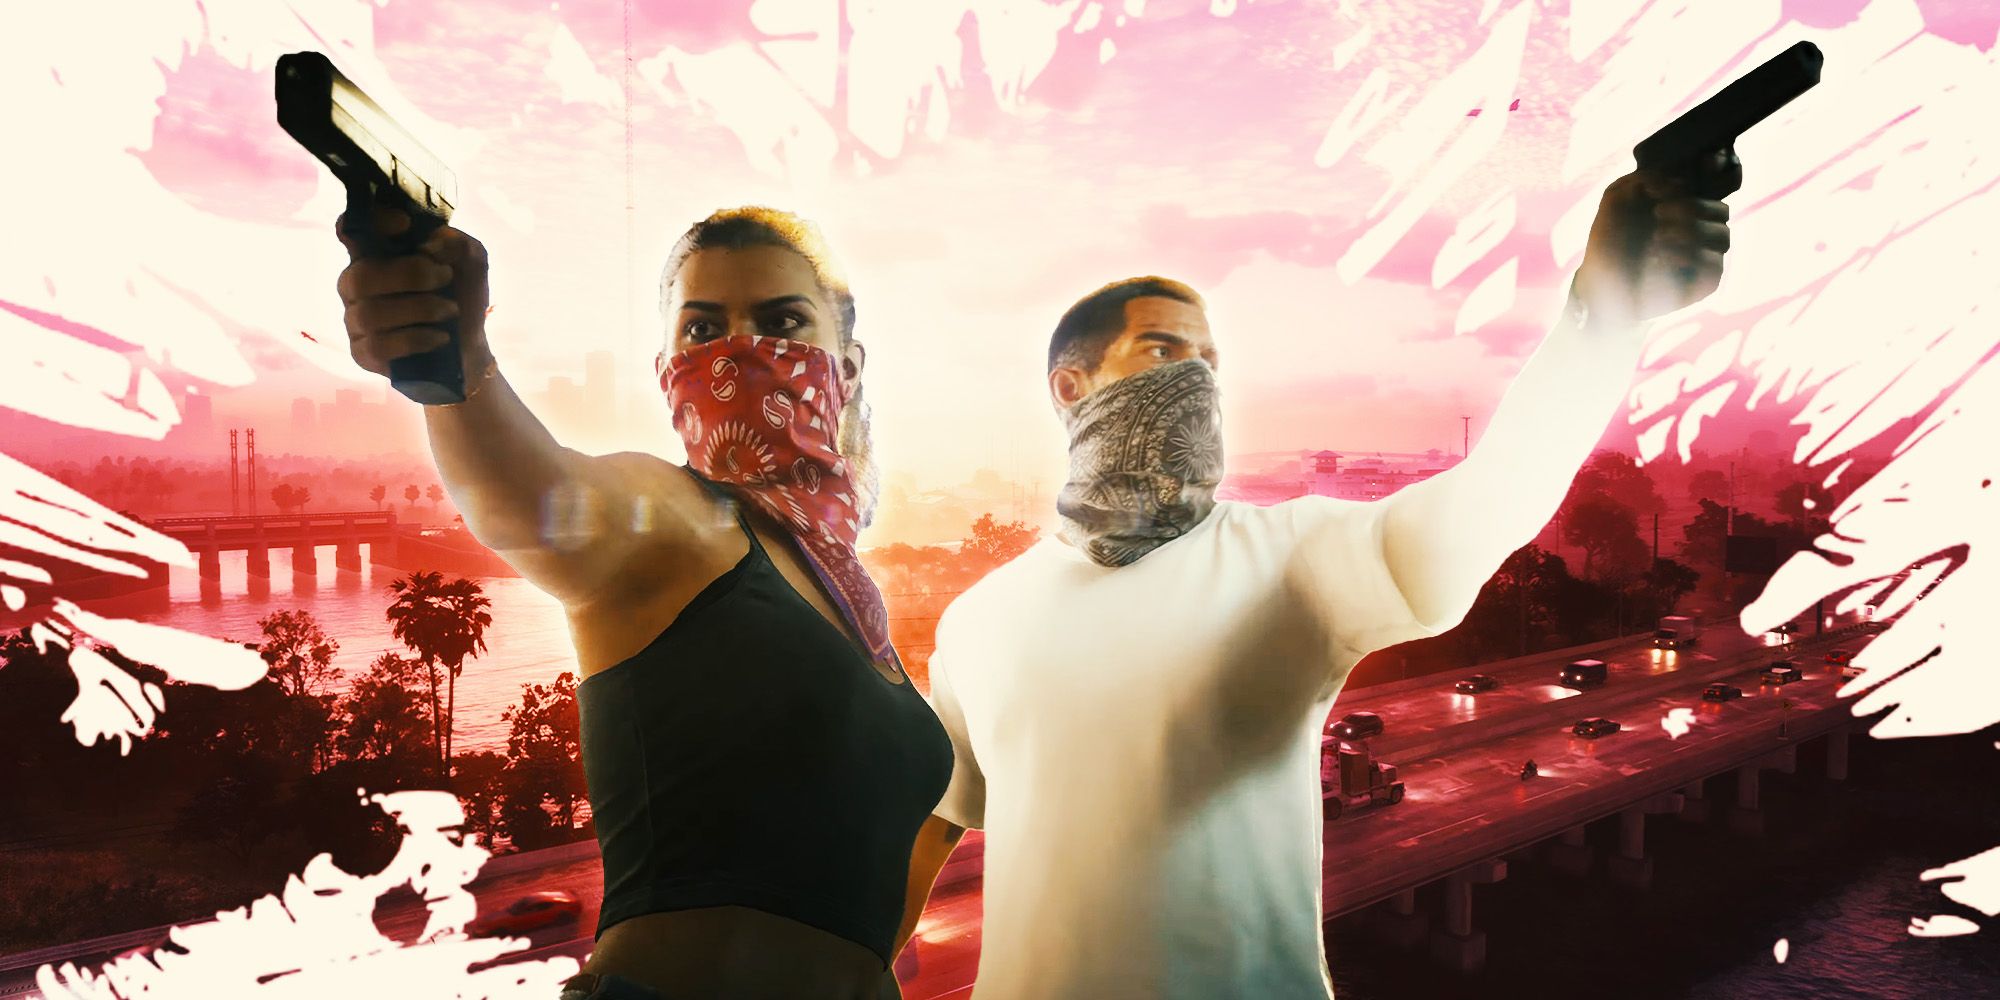 Female and male protagonists in GTA 6 holding out handguns with pink Miami-like setting in the background.